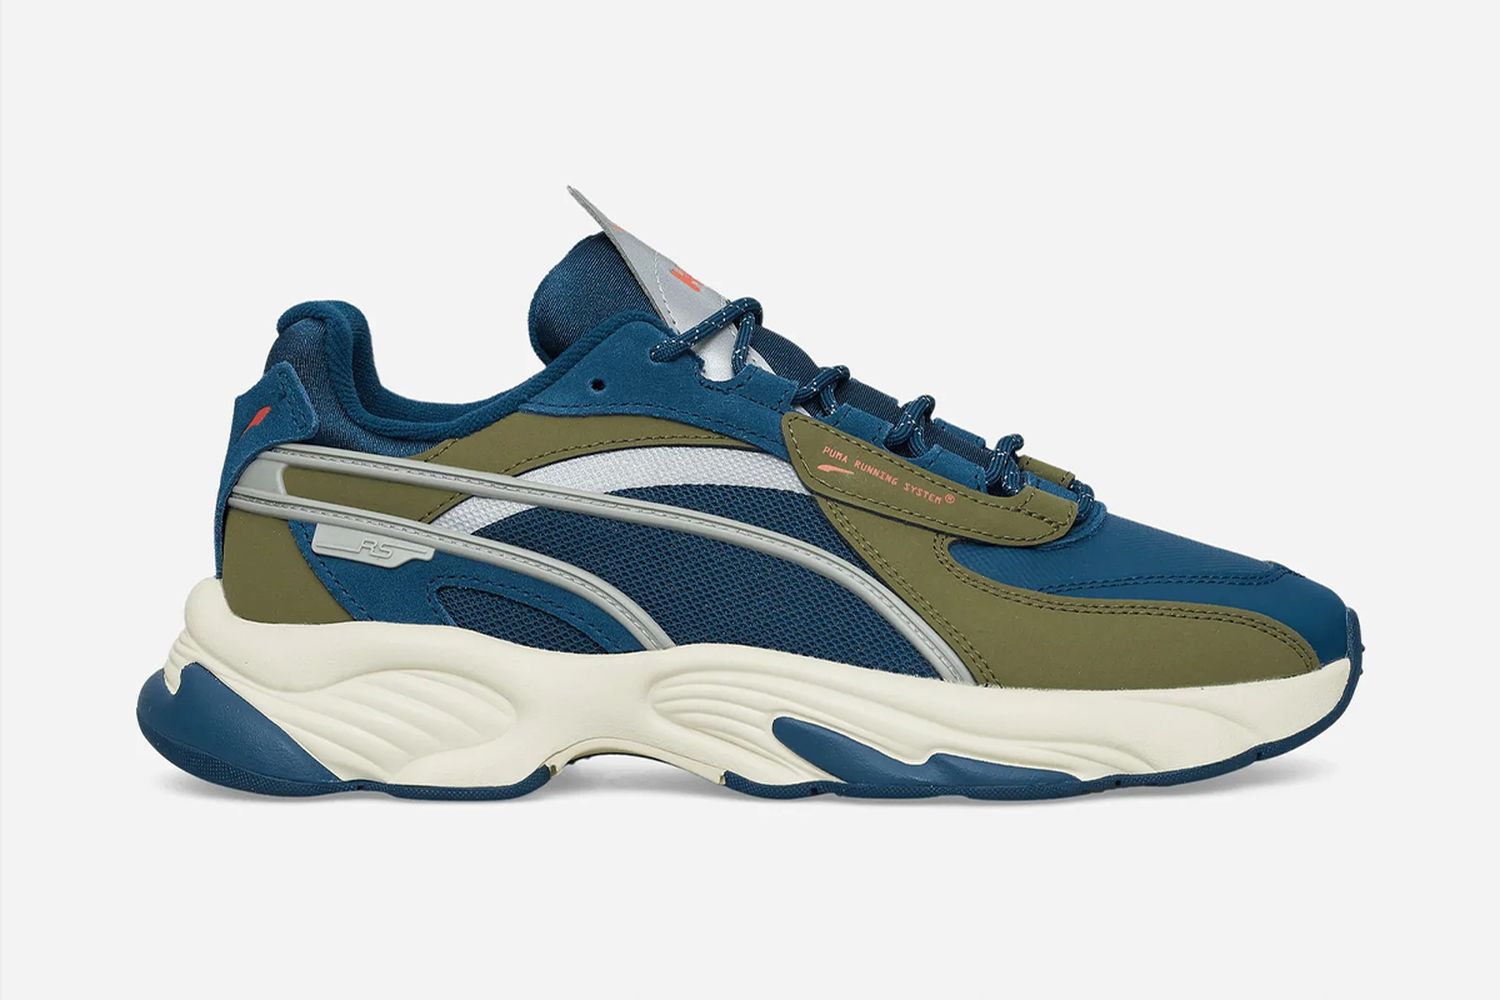 Incomodidad tengo hambre Gimnasia 14 of the Best PUMA Sneakers to Buy in 2022